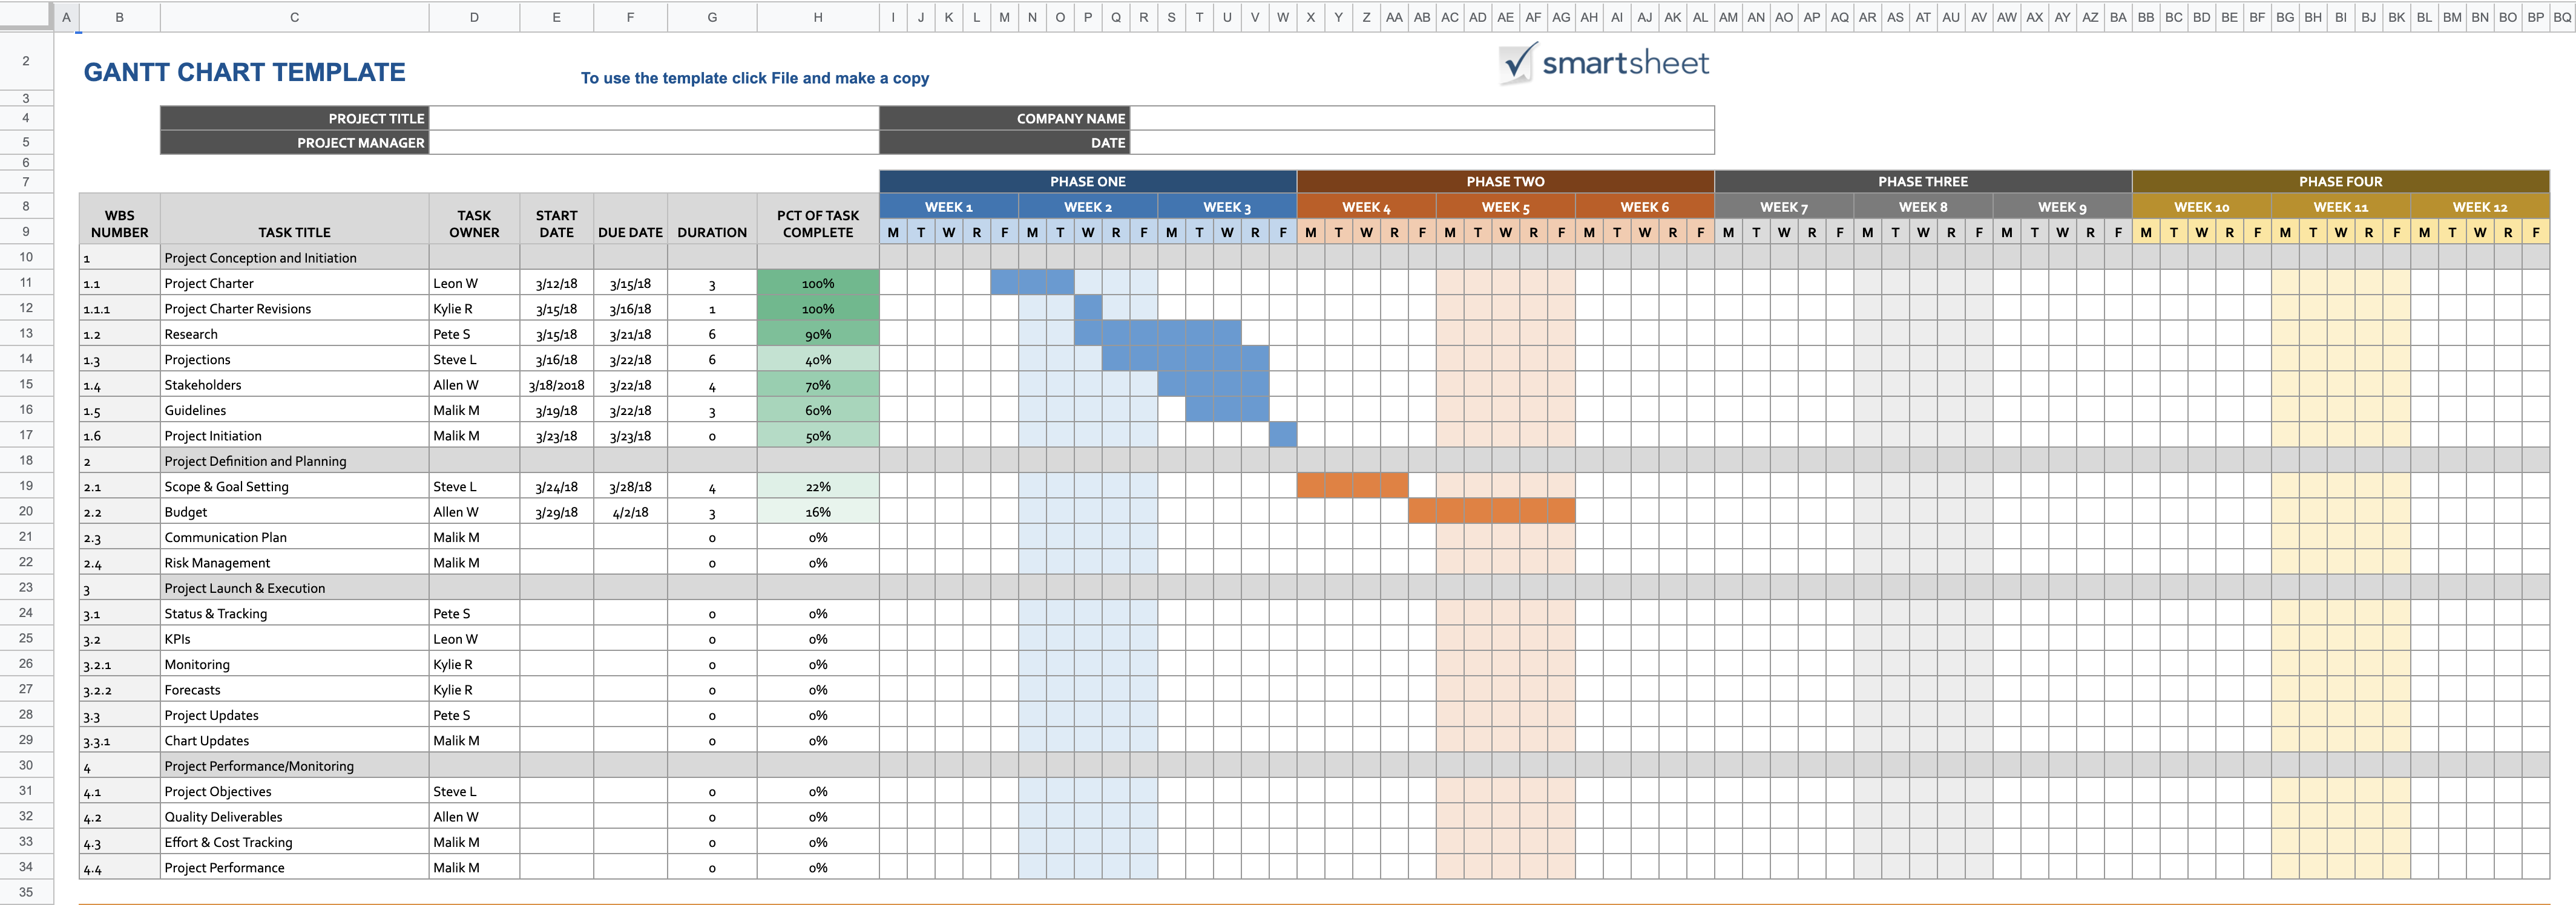 Why I made Gantt chart for the project?